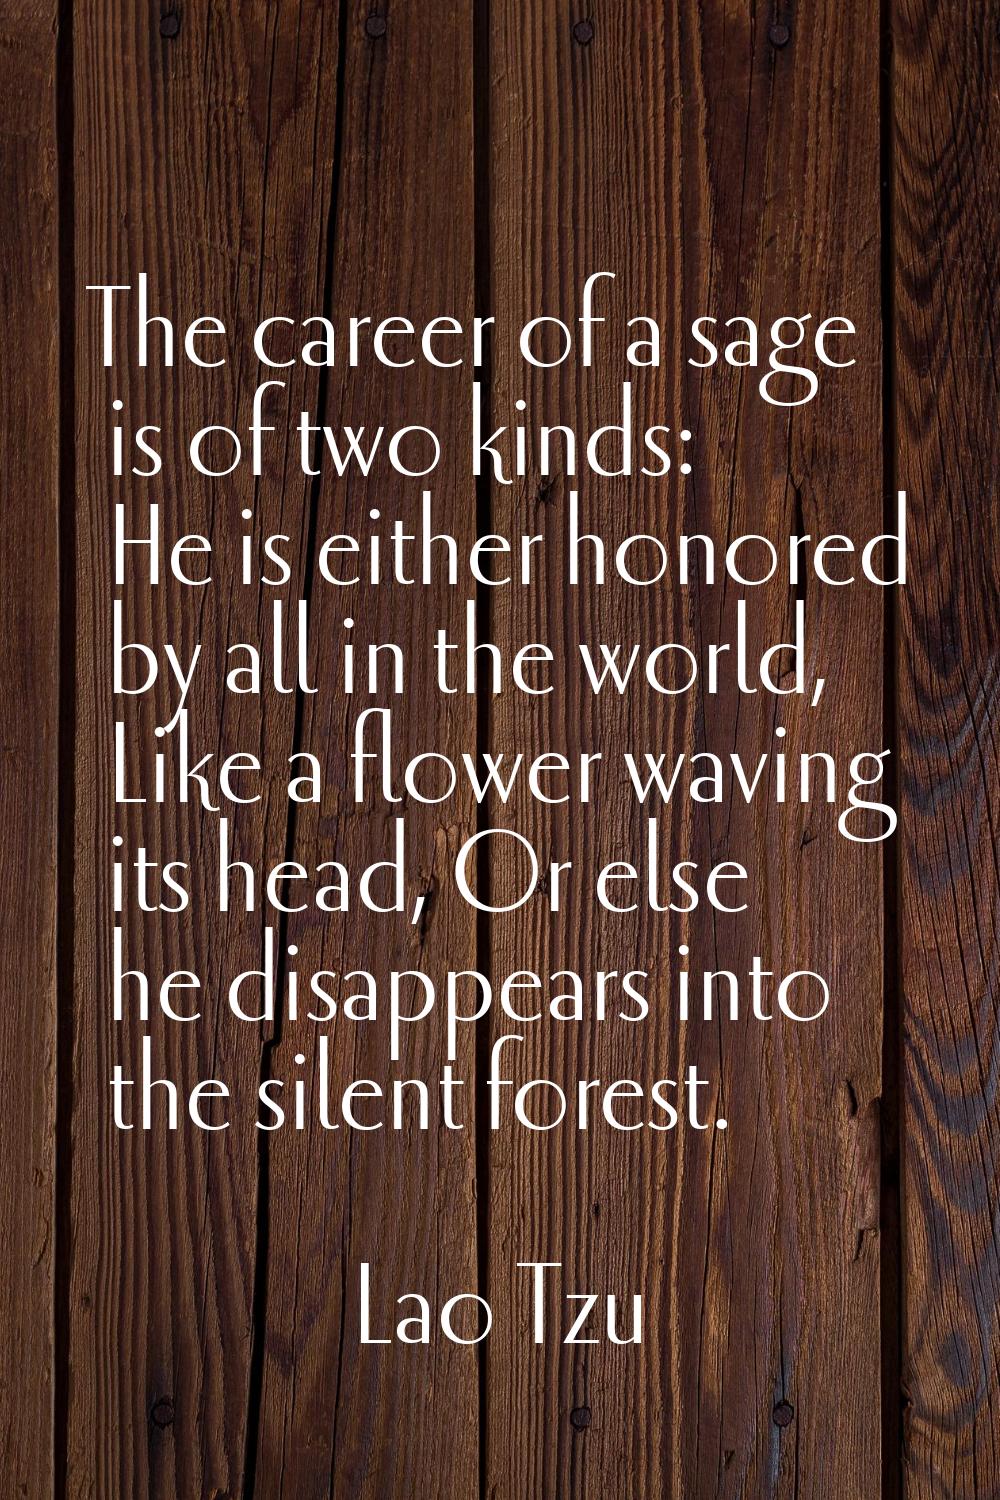 The career of a sage is of two kinds: He is either honored by all in the world, Like a flower wavin